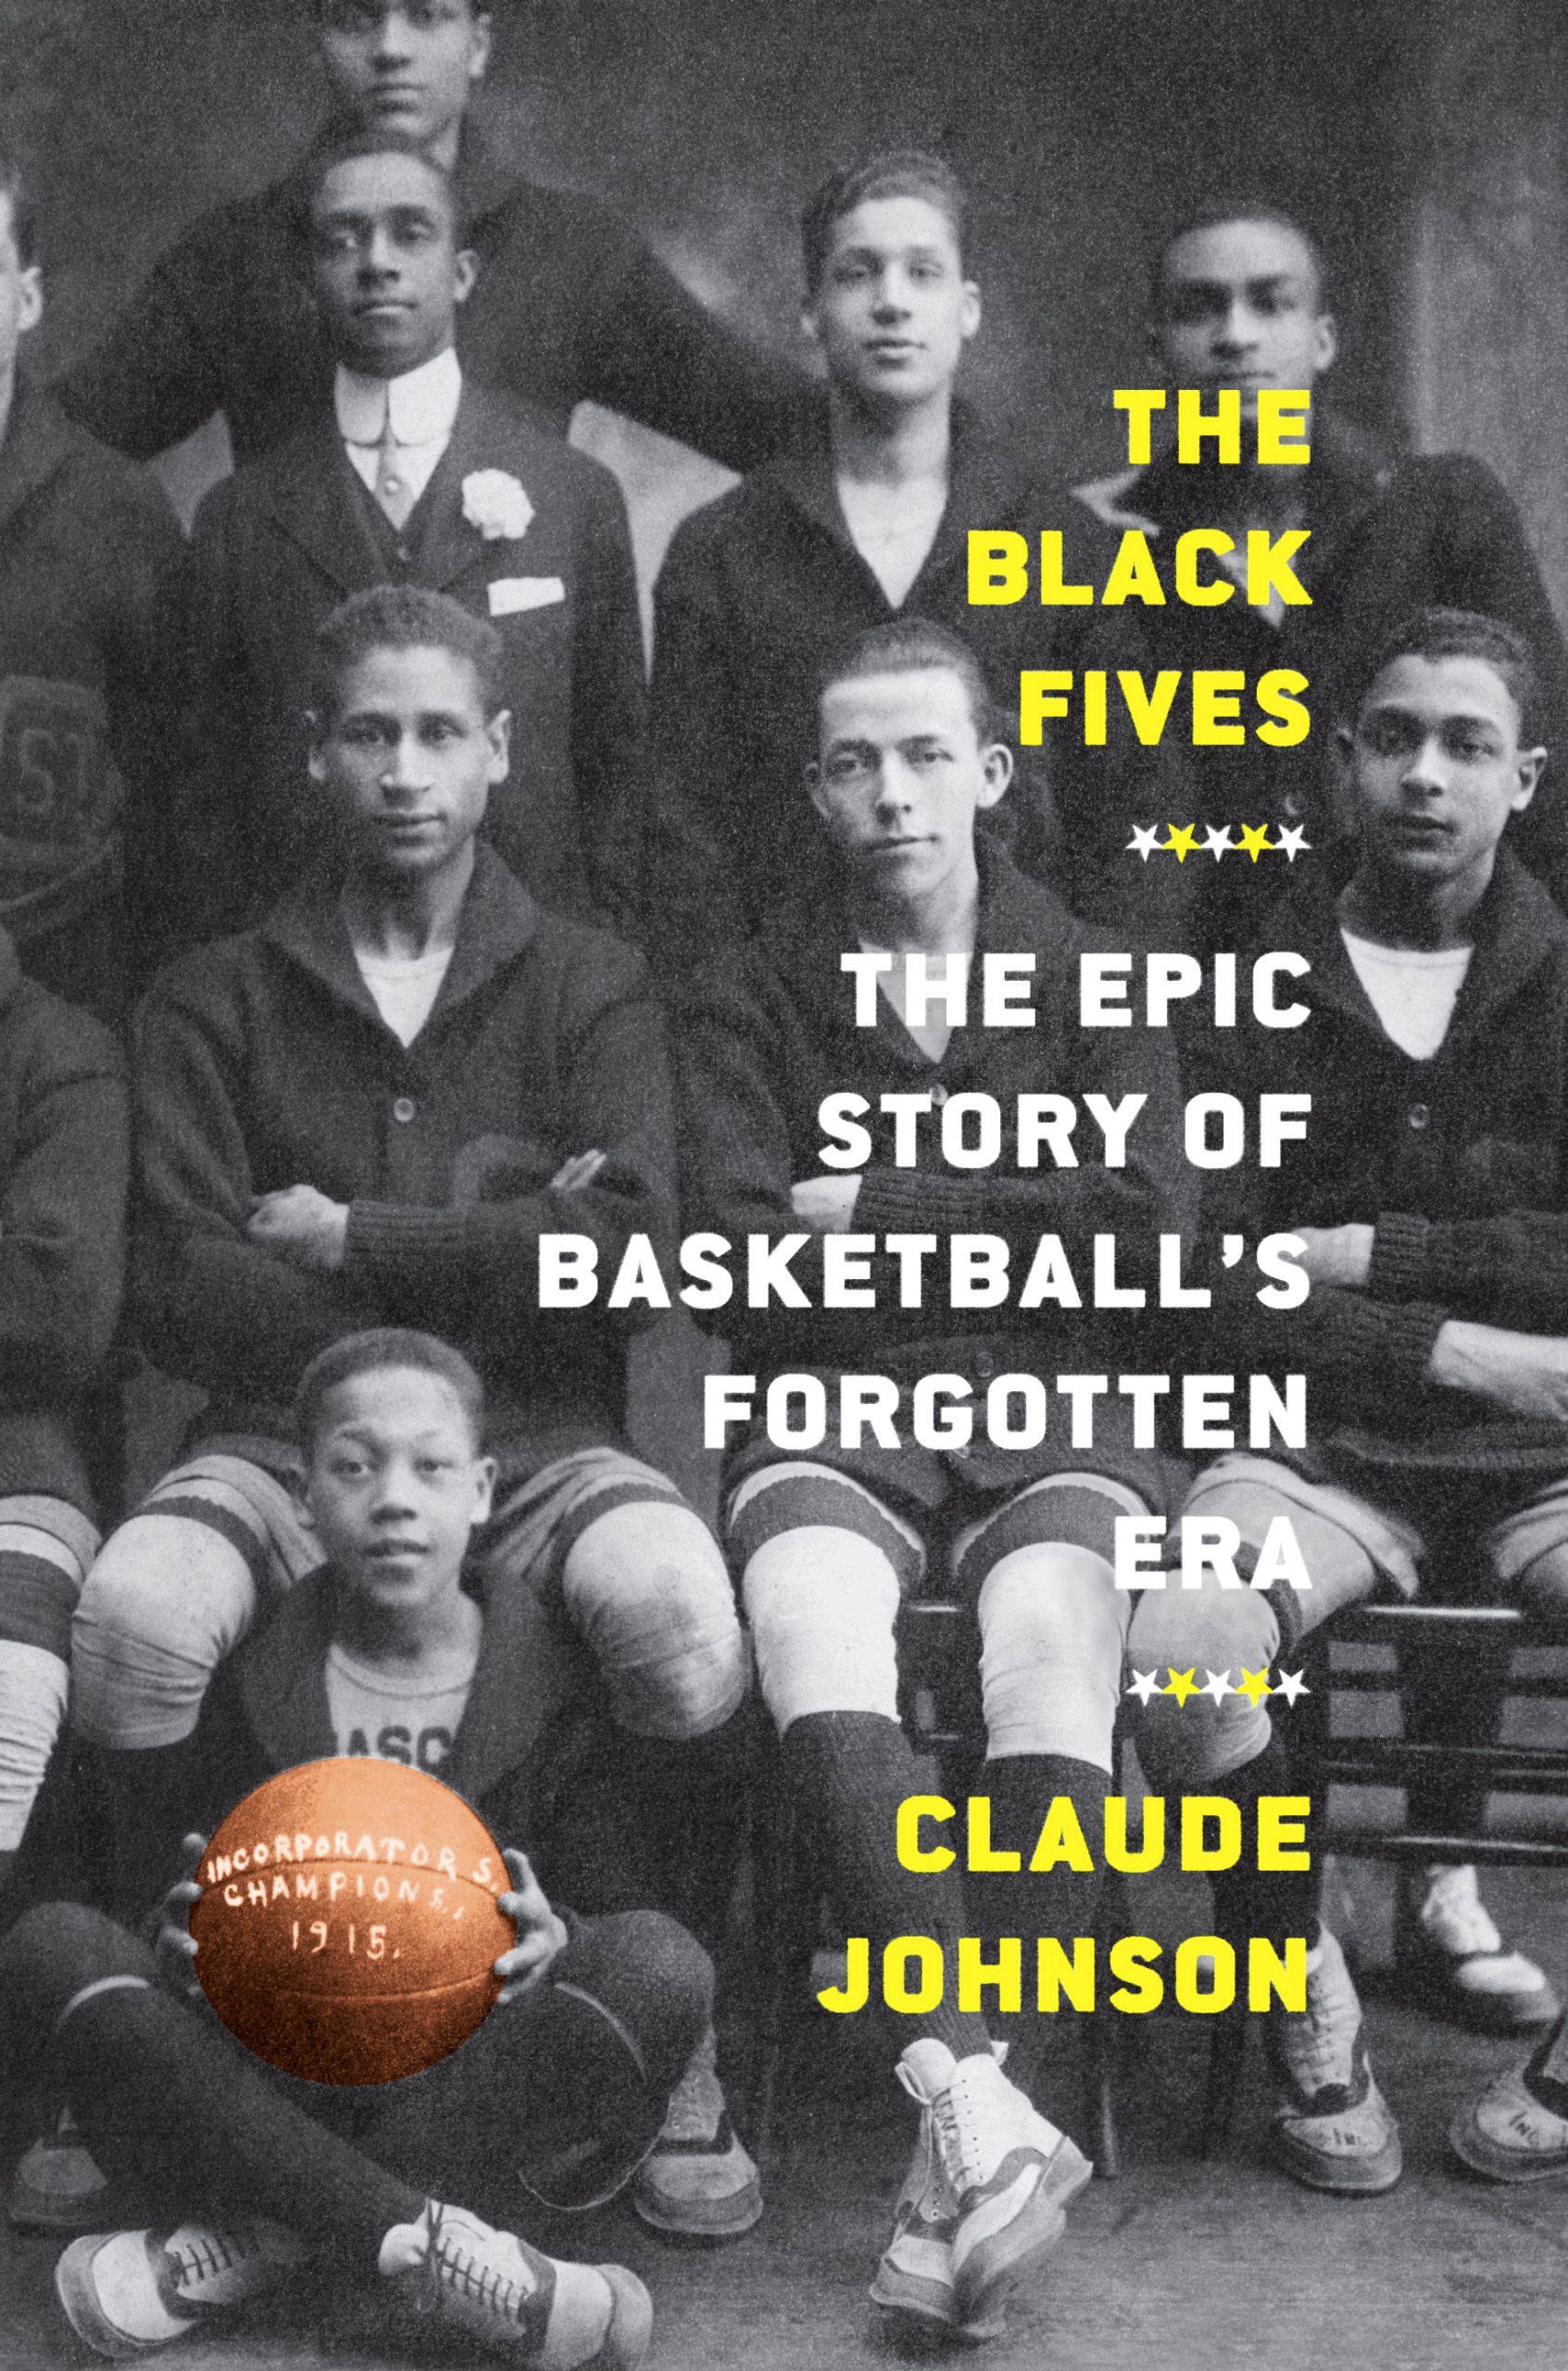 Black History Heroes on X: Black-owned professional basketball